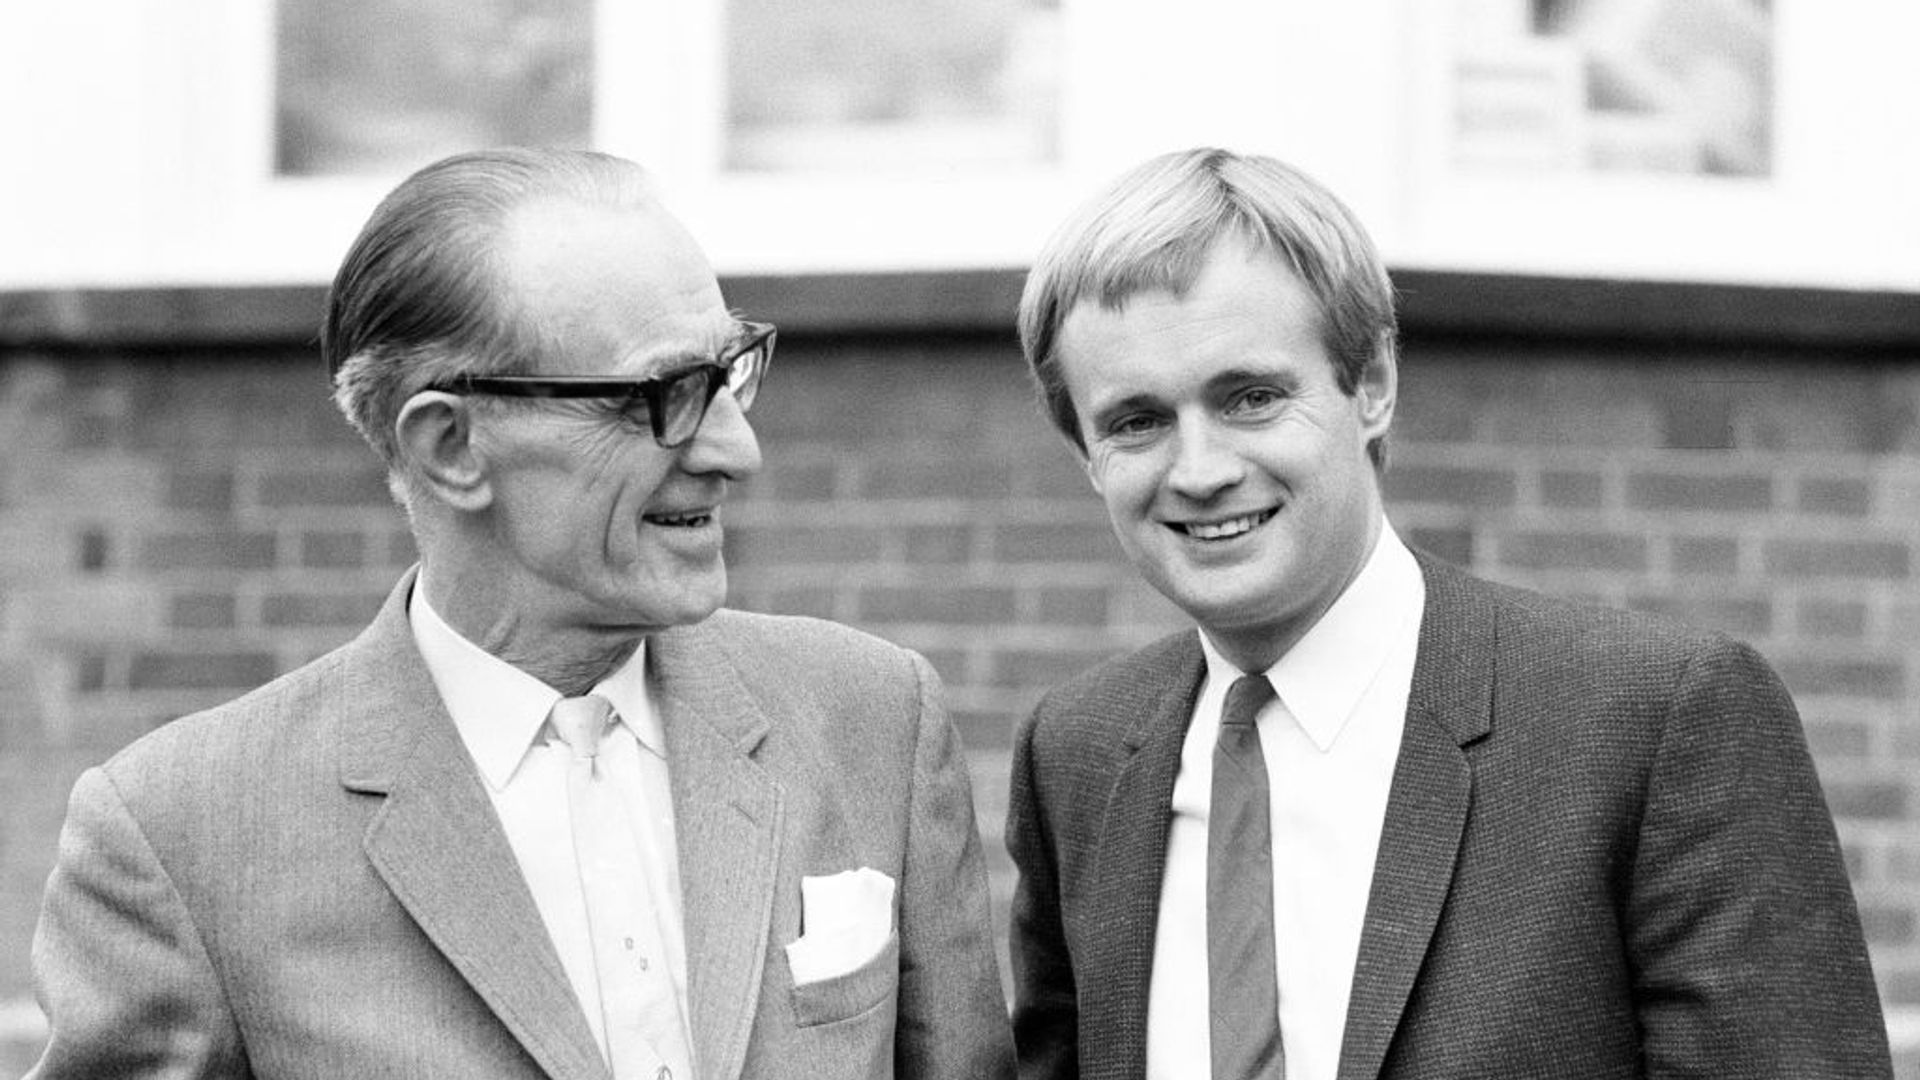 David McCallum Jr pictured with his father, David Sr, in 1966 at his parents house. 